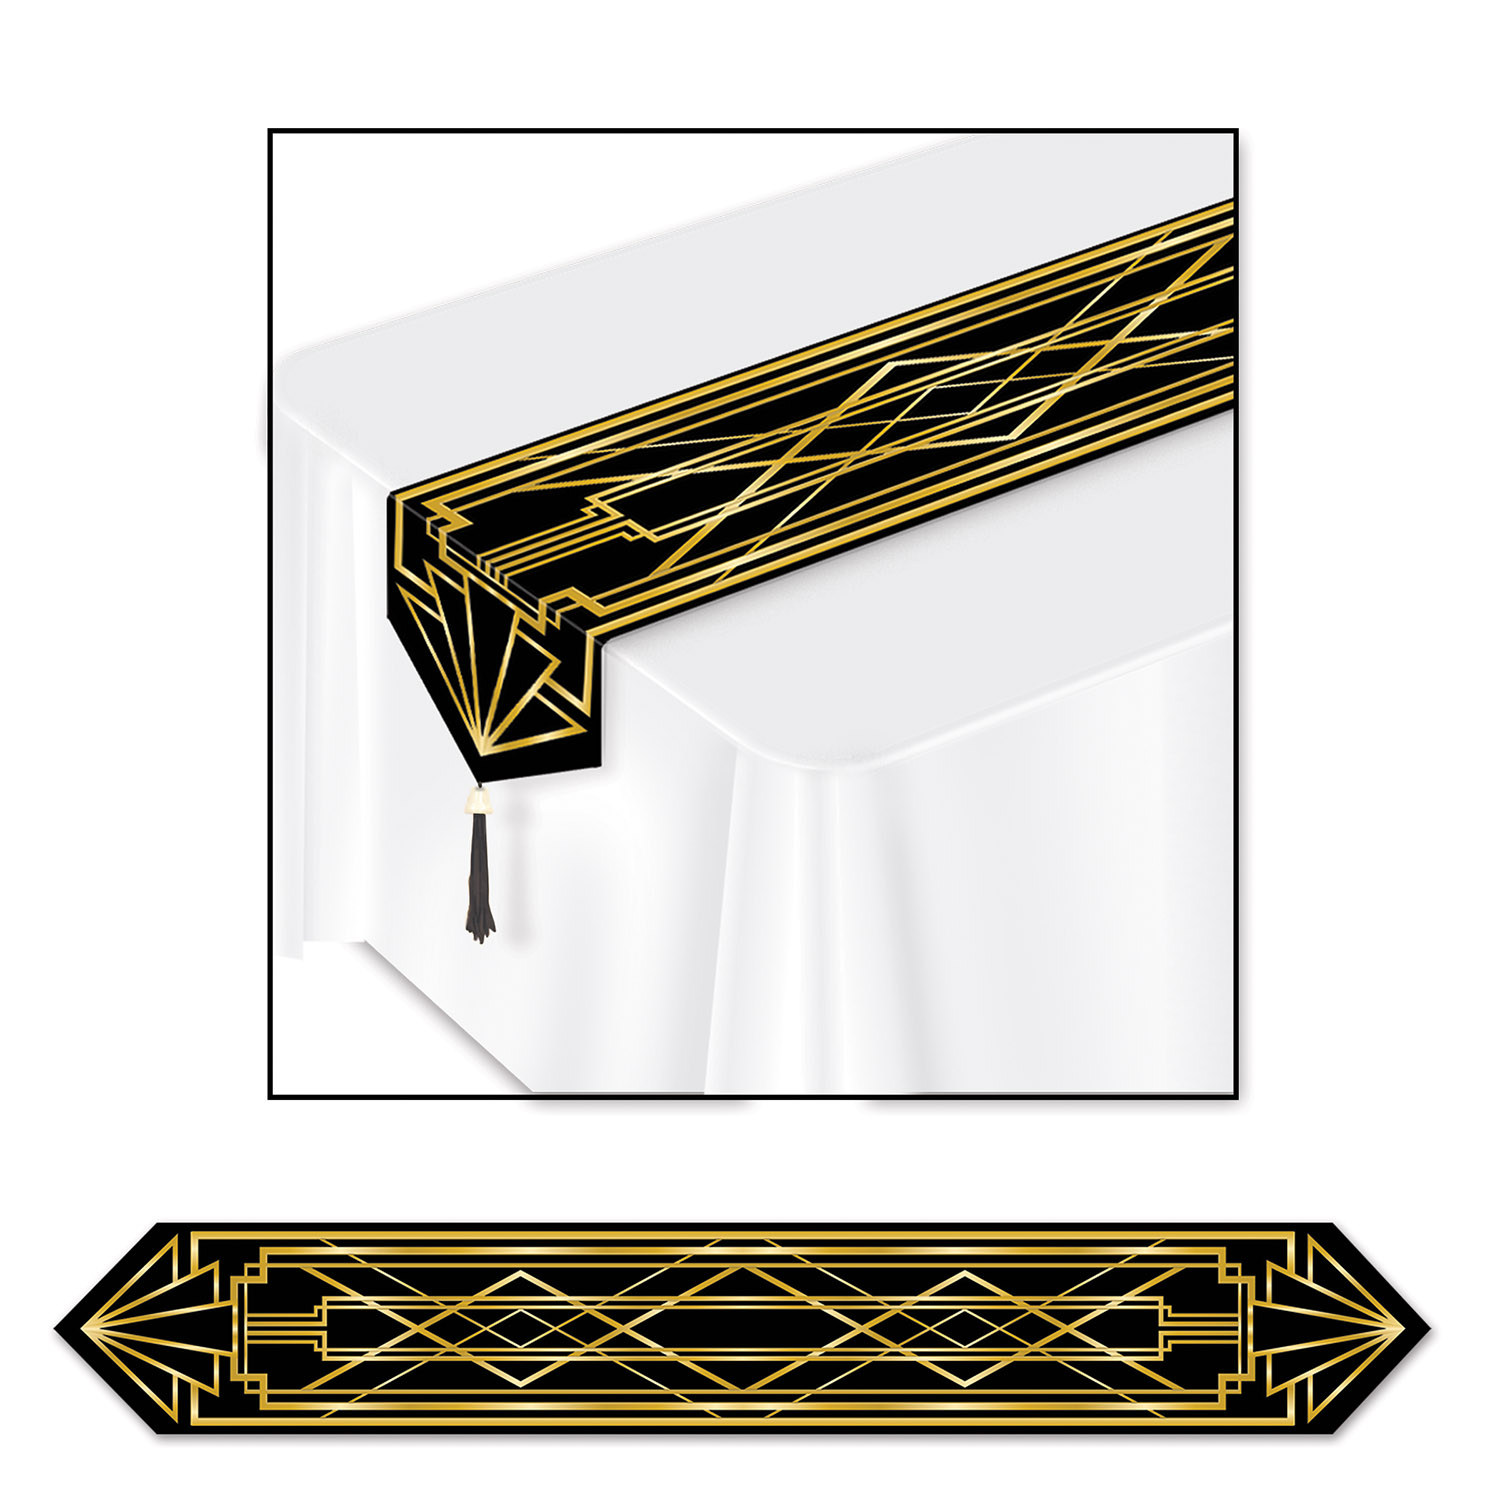 Black background table runner with beautiful gold accent designs.